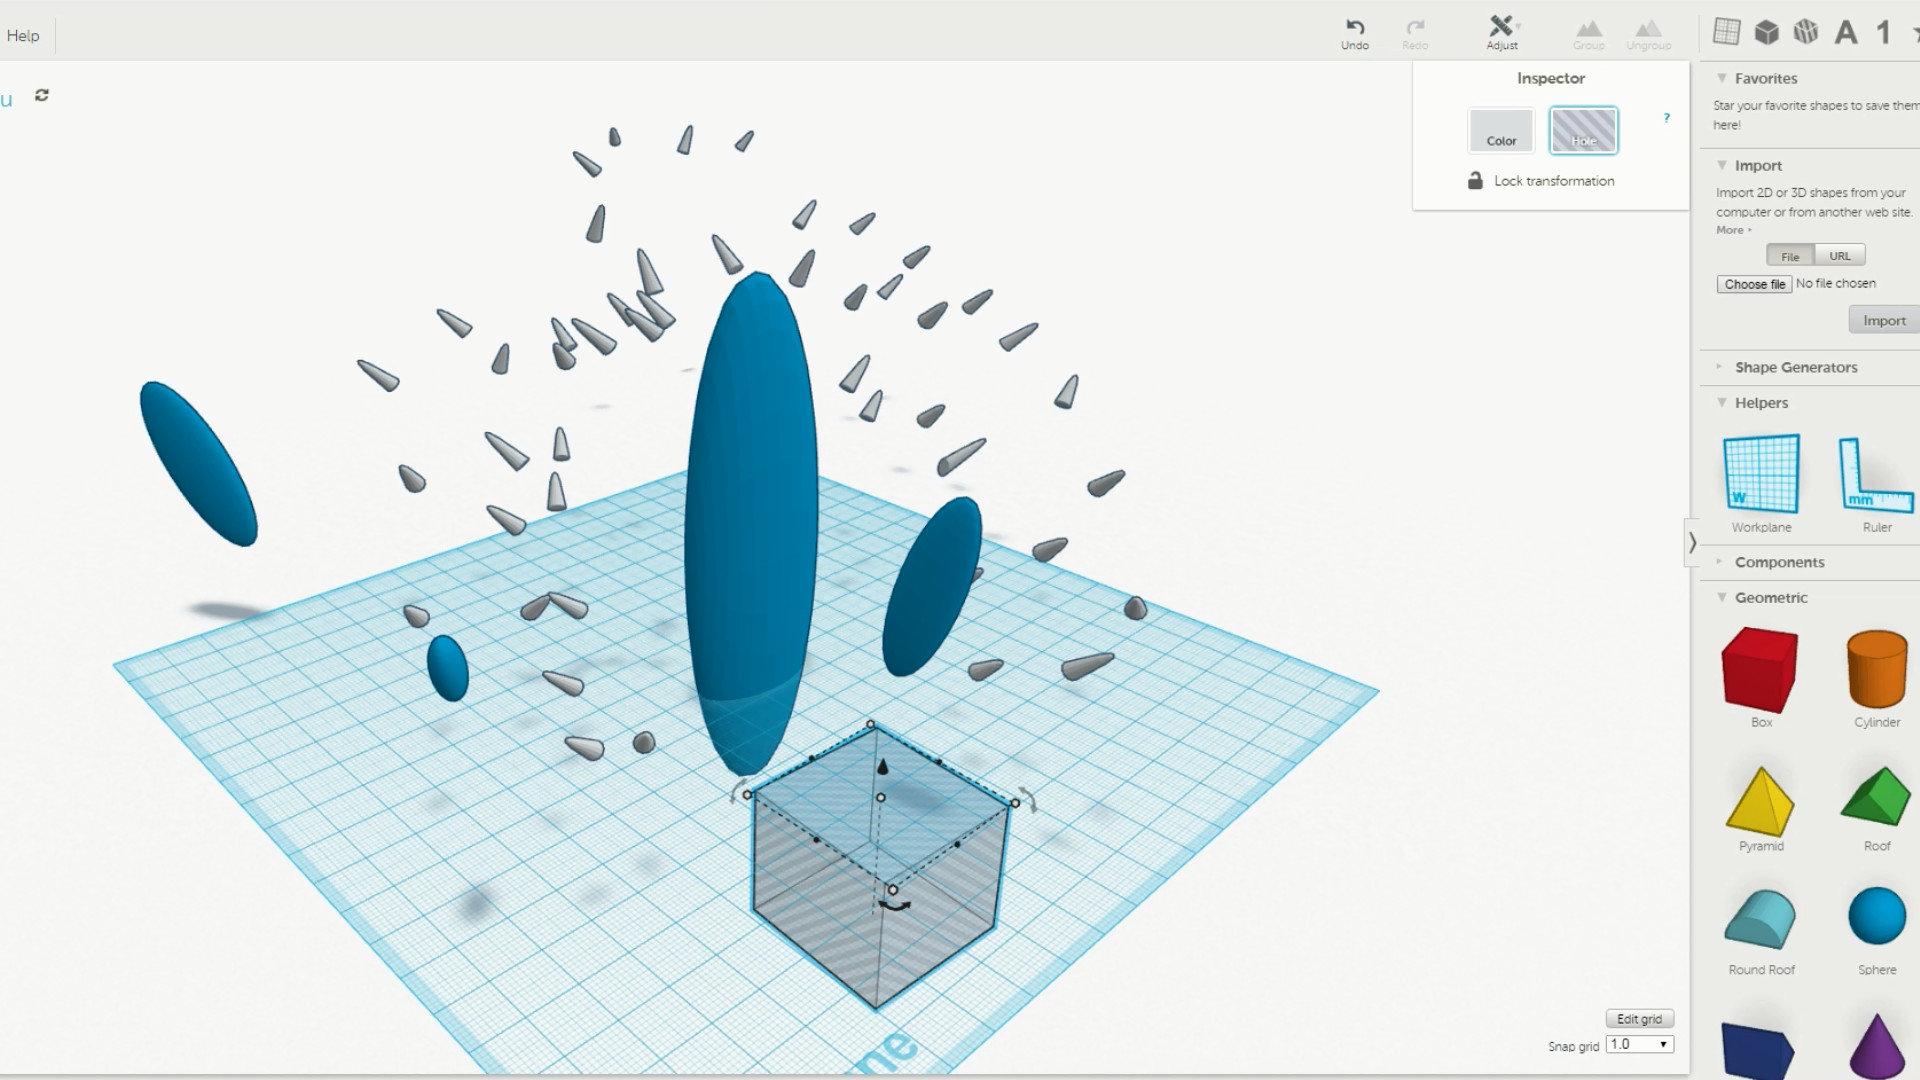 3D Design Software for 3D Printing - Tinkercad - The Best for Beginners